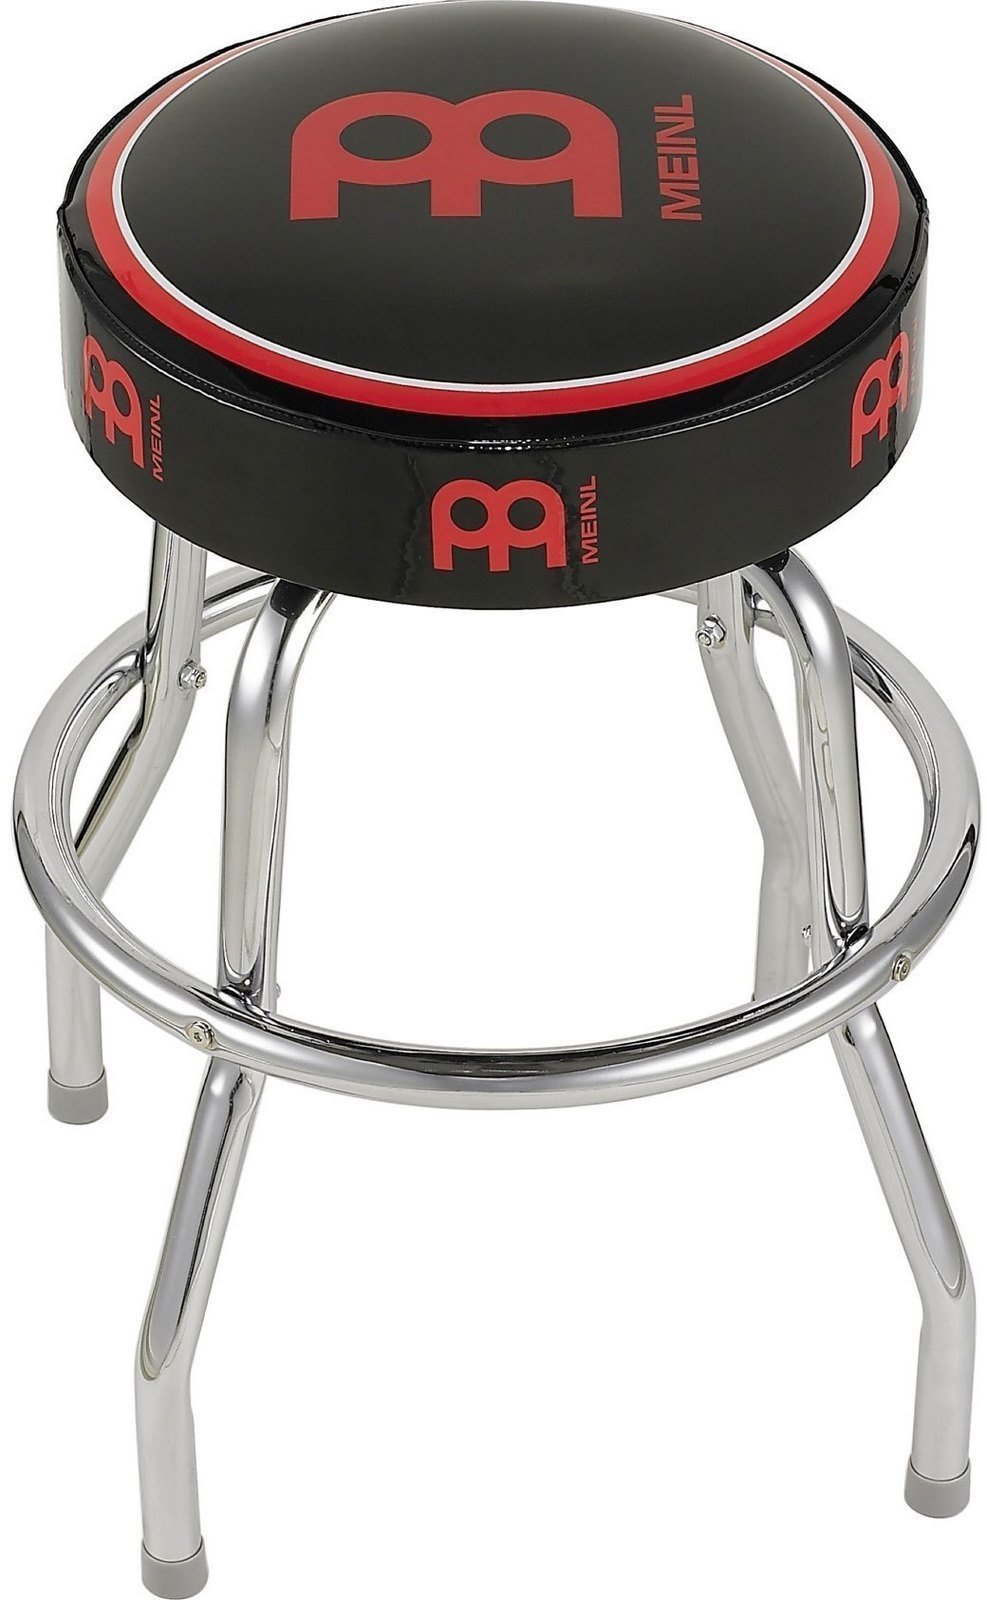 Other Music Accessories Meinl Other Music Accessories